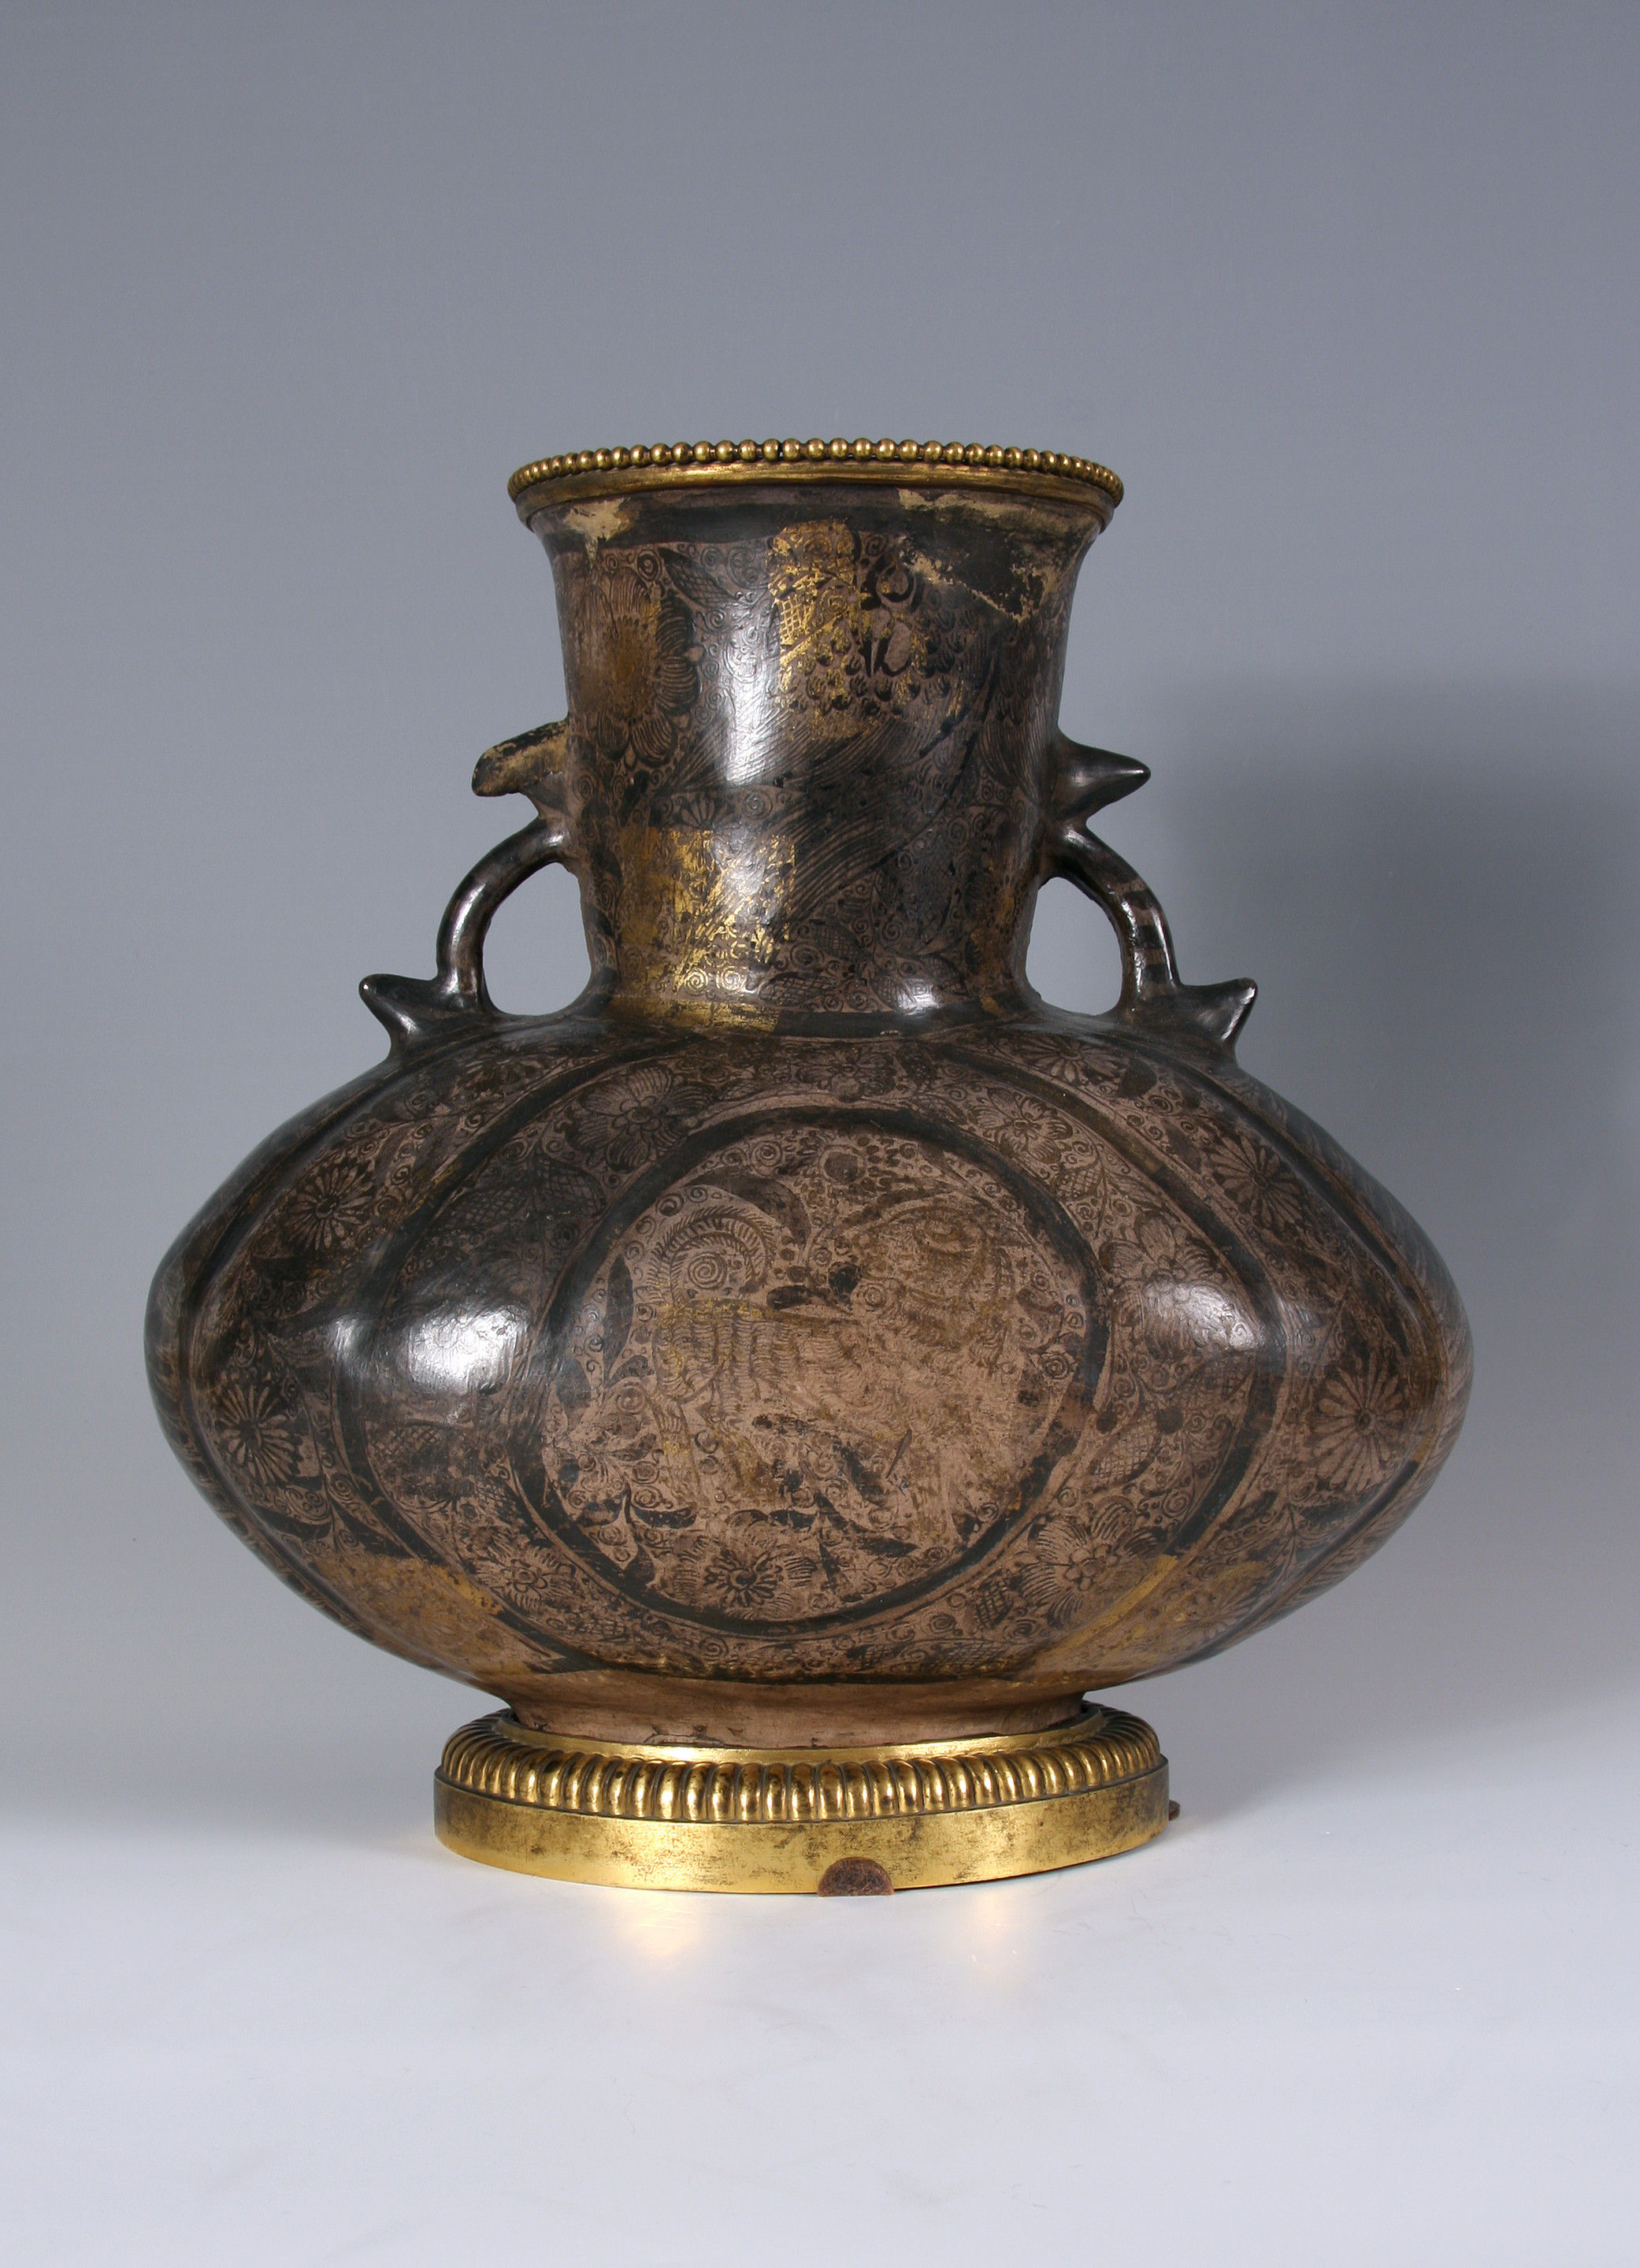 A Tonalá (Guadalajara) burnished earthenware two-handled vase, jarrón, densely painted in black with floral scrolls, birds and stylised lions with areas of applied gold leaf